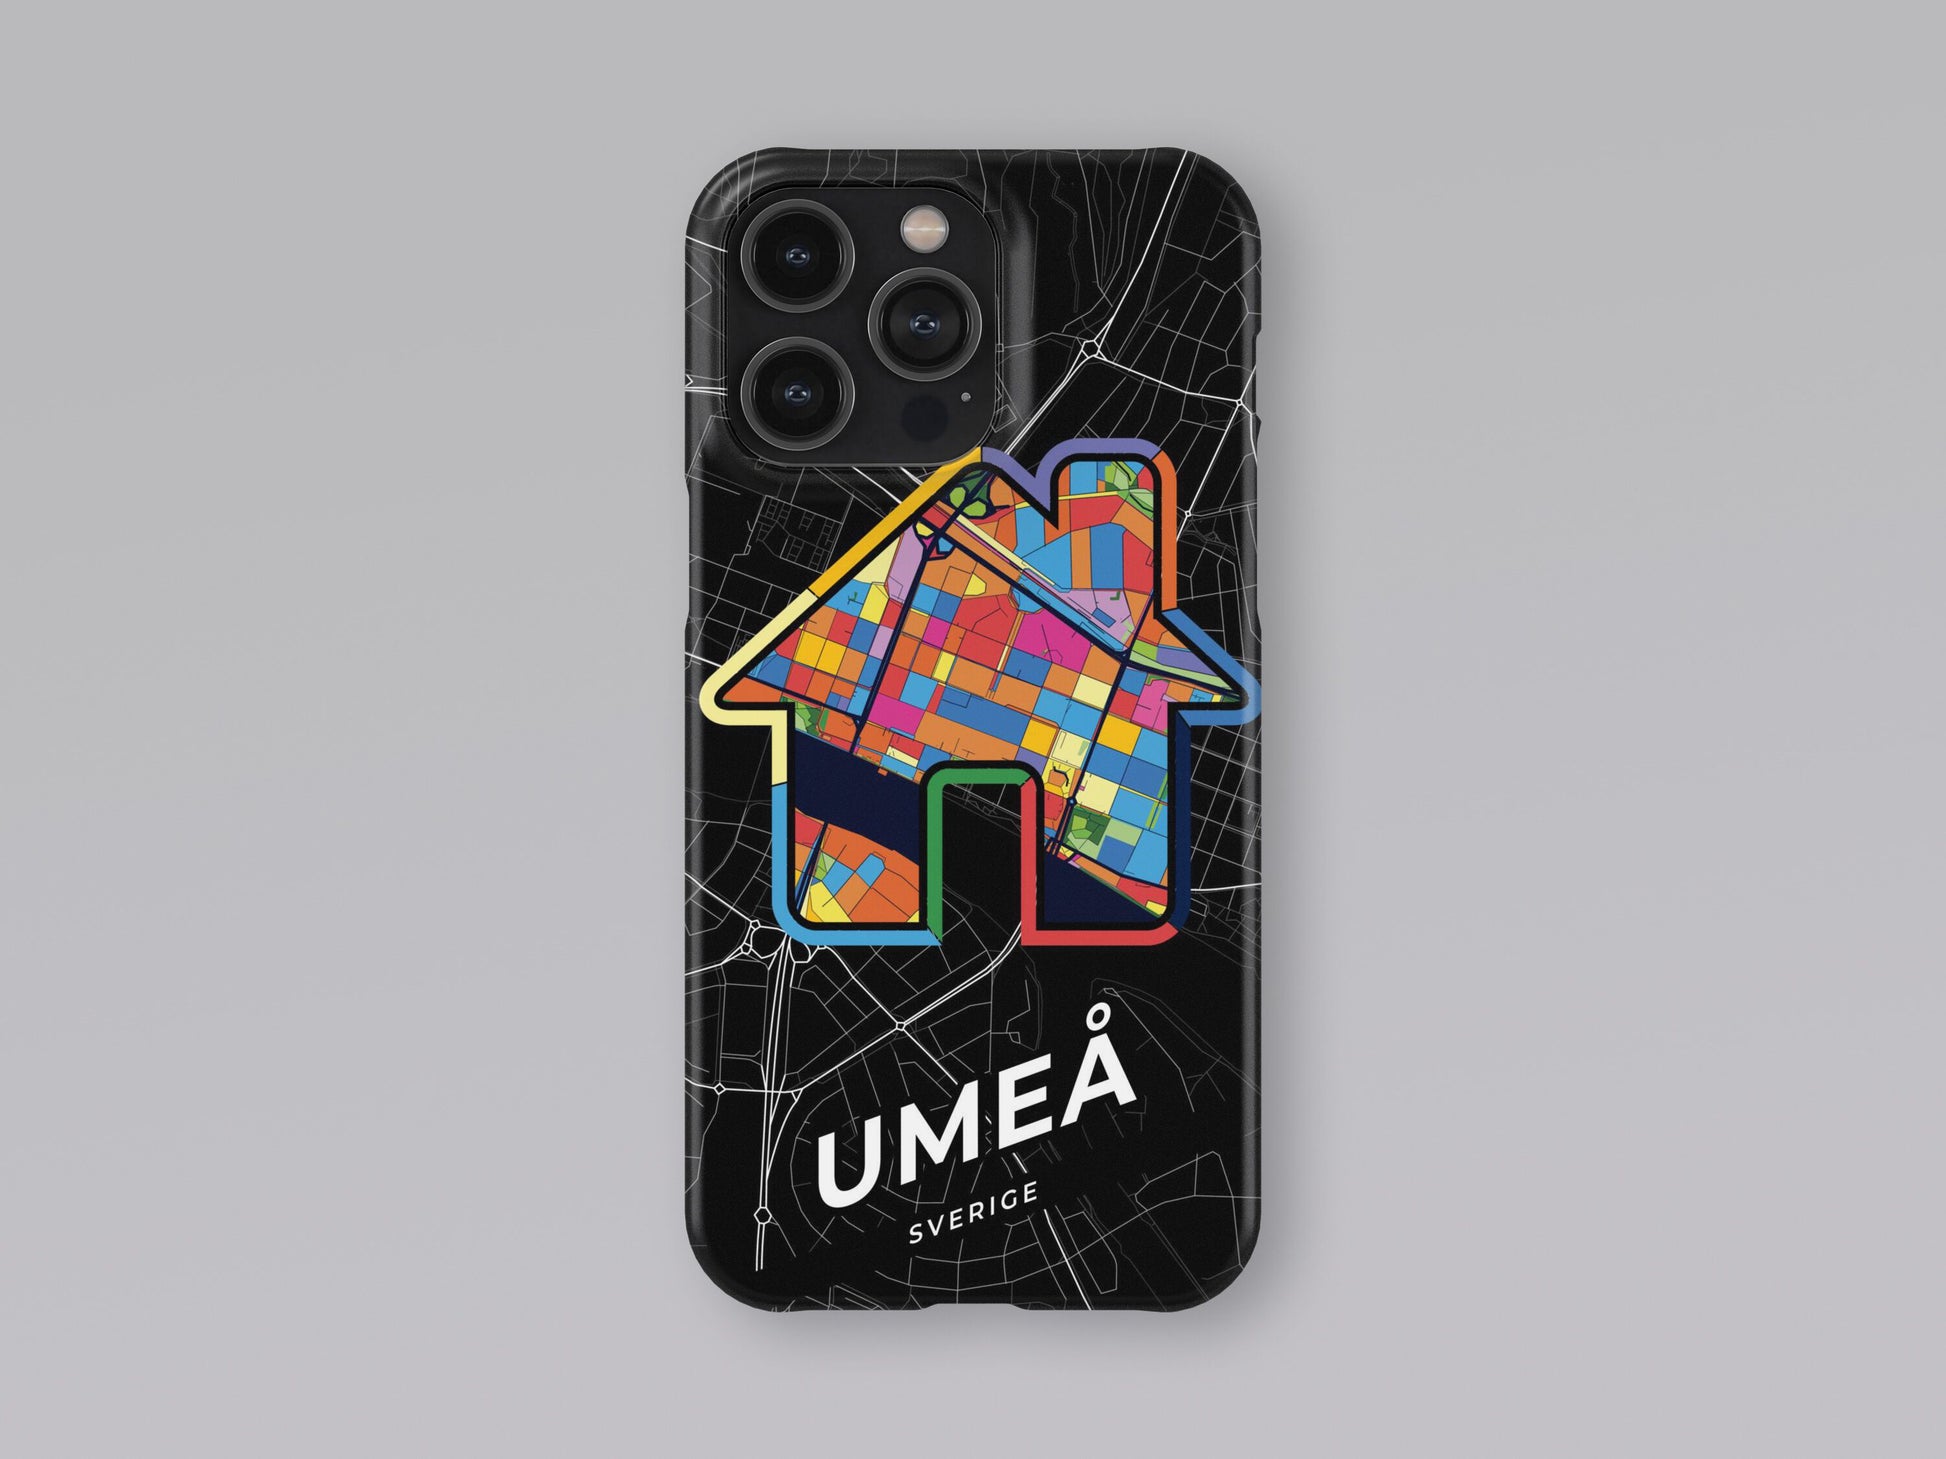 Umeå Sweden slim phone case with colorful icon 3